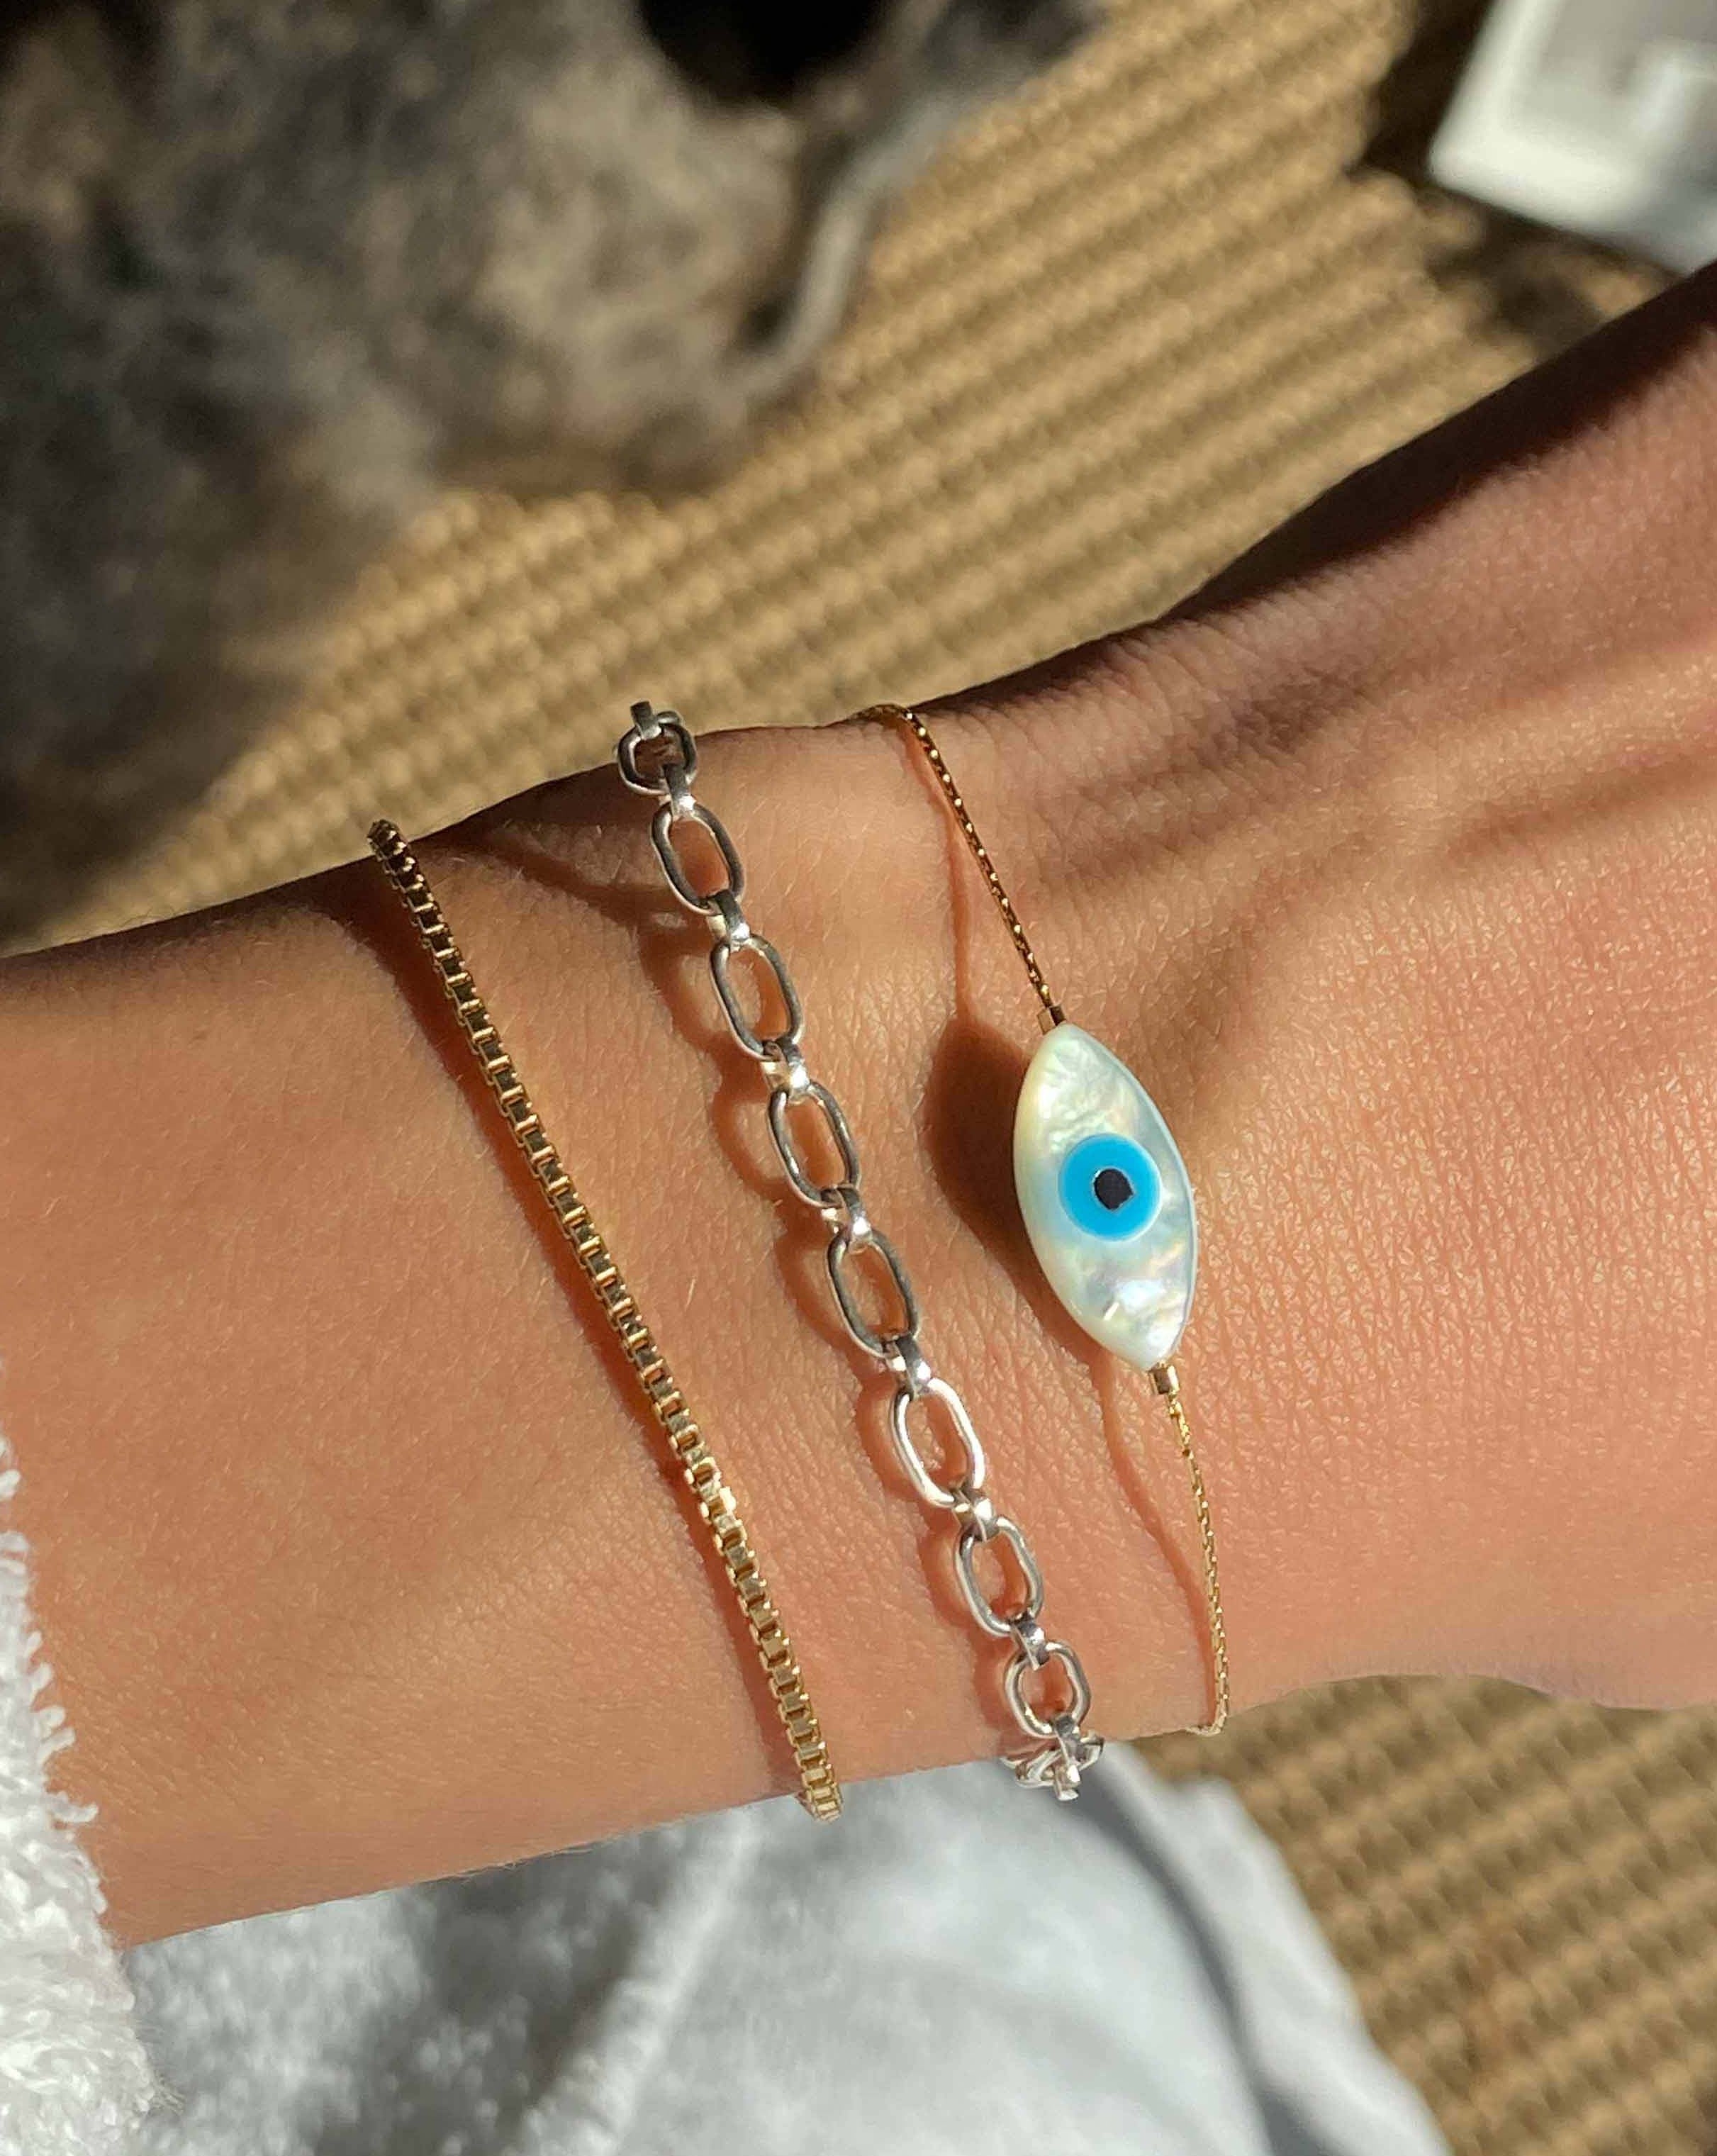 Izu Bracelet by KOZAKH. A 6 to 7 inch adjustable length, 1mm thick cordette chain bracelet in 14K Gold Filled, featuring a hand carved Mother of Pearl evil eye charm.